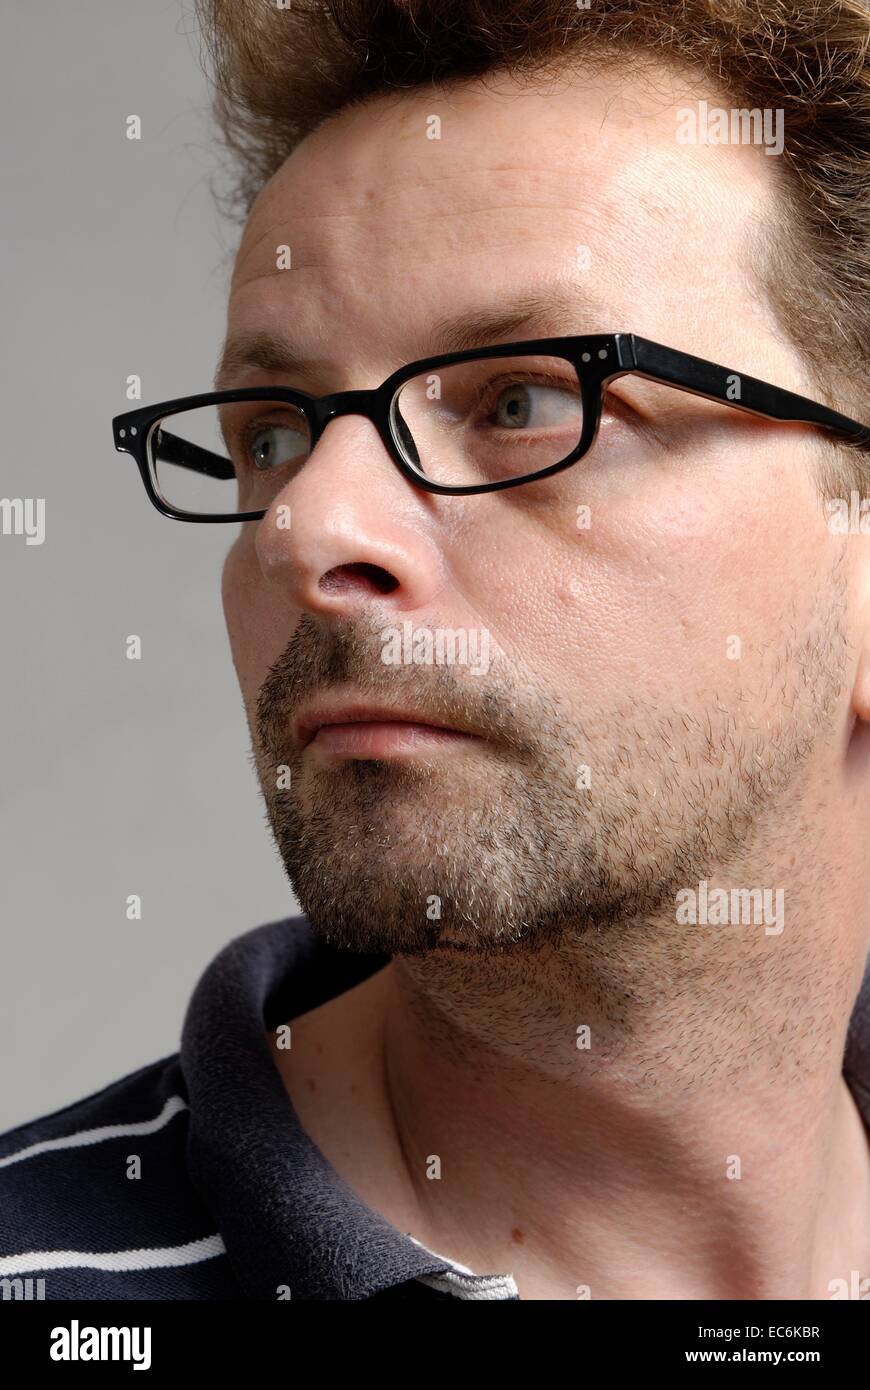 Man with glasses, forty years of age Stock Photo